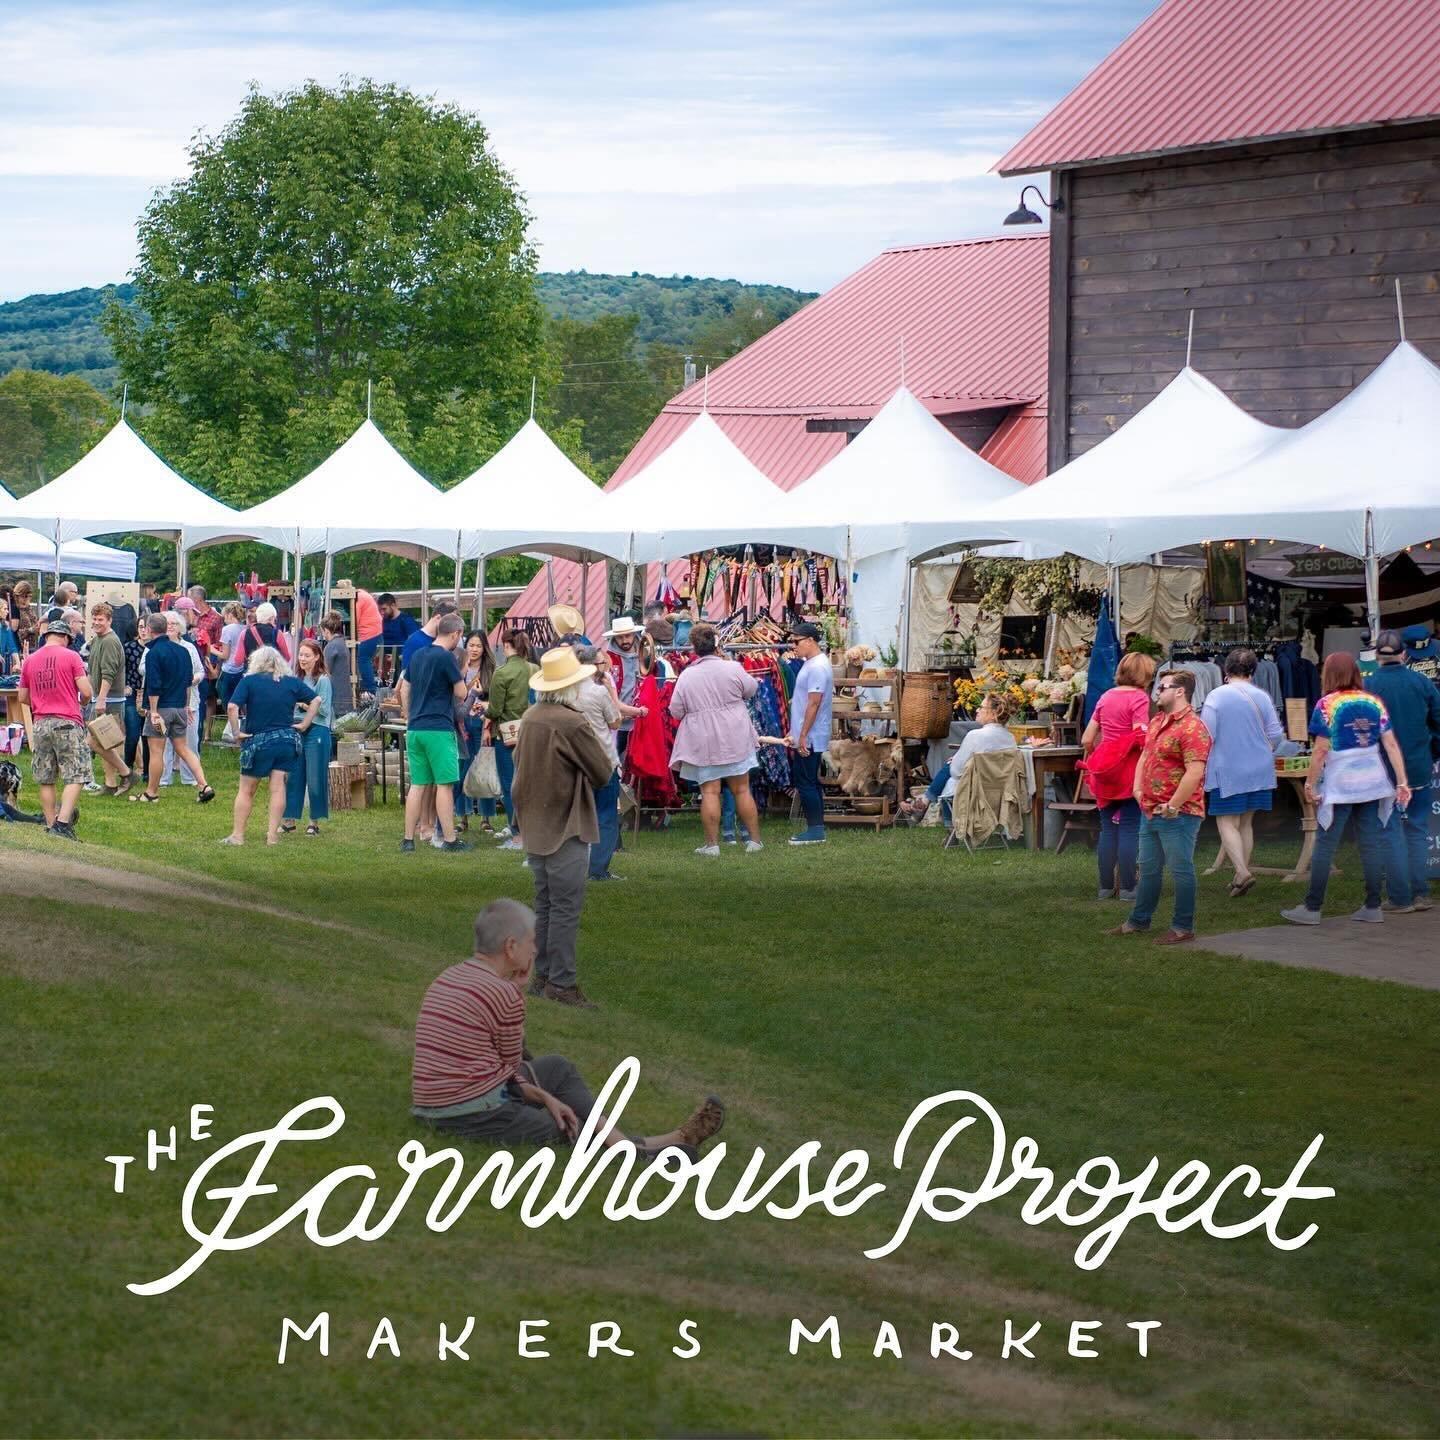 This weekend! Come see me and a slew of other artisan vendors at @thefarmhouseproject&rsquo;s Spring Makers Market: May 18-19, 11am - 5pm at @thebarnonhubbard in Callicoon, NY.

I&rsquo;ll have new berry bowls, bud vases and larger vases, planters bi